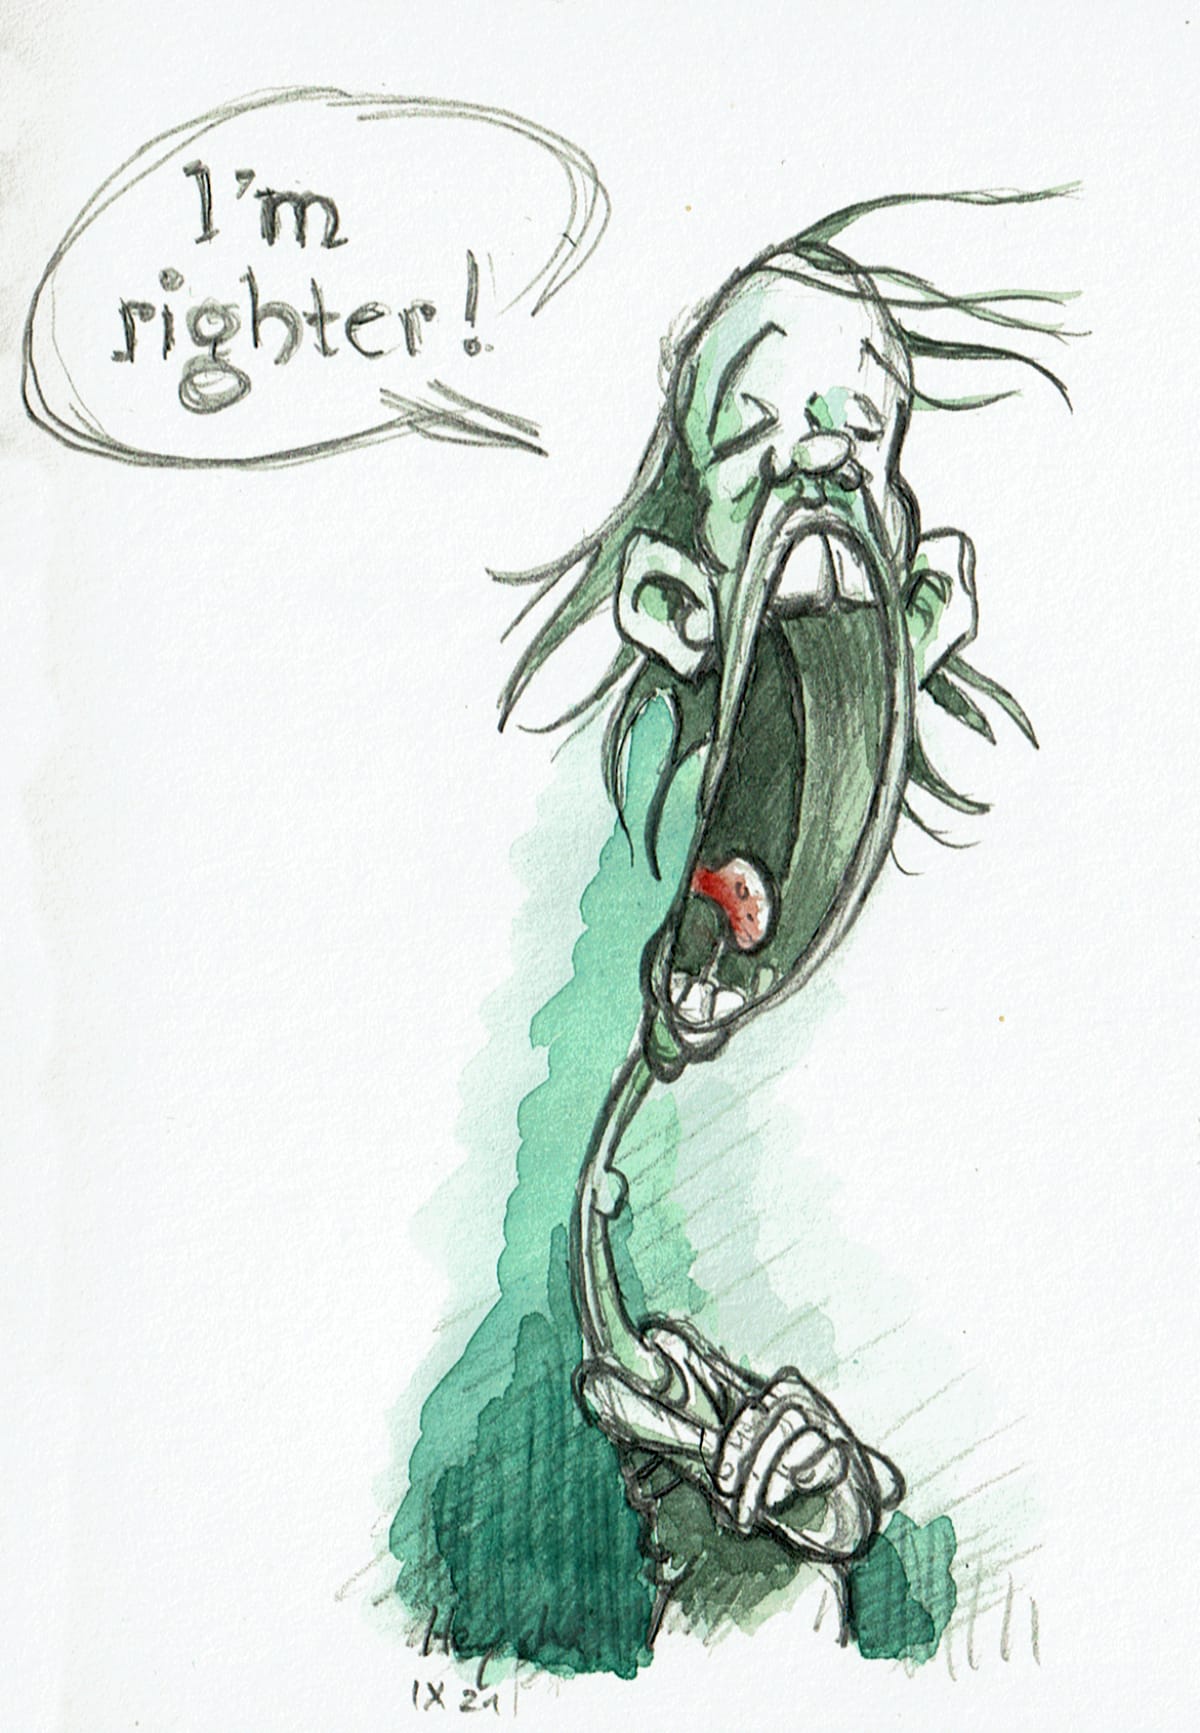 Cartoon “I’m righter than you!”